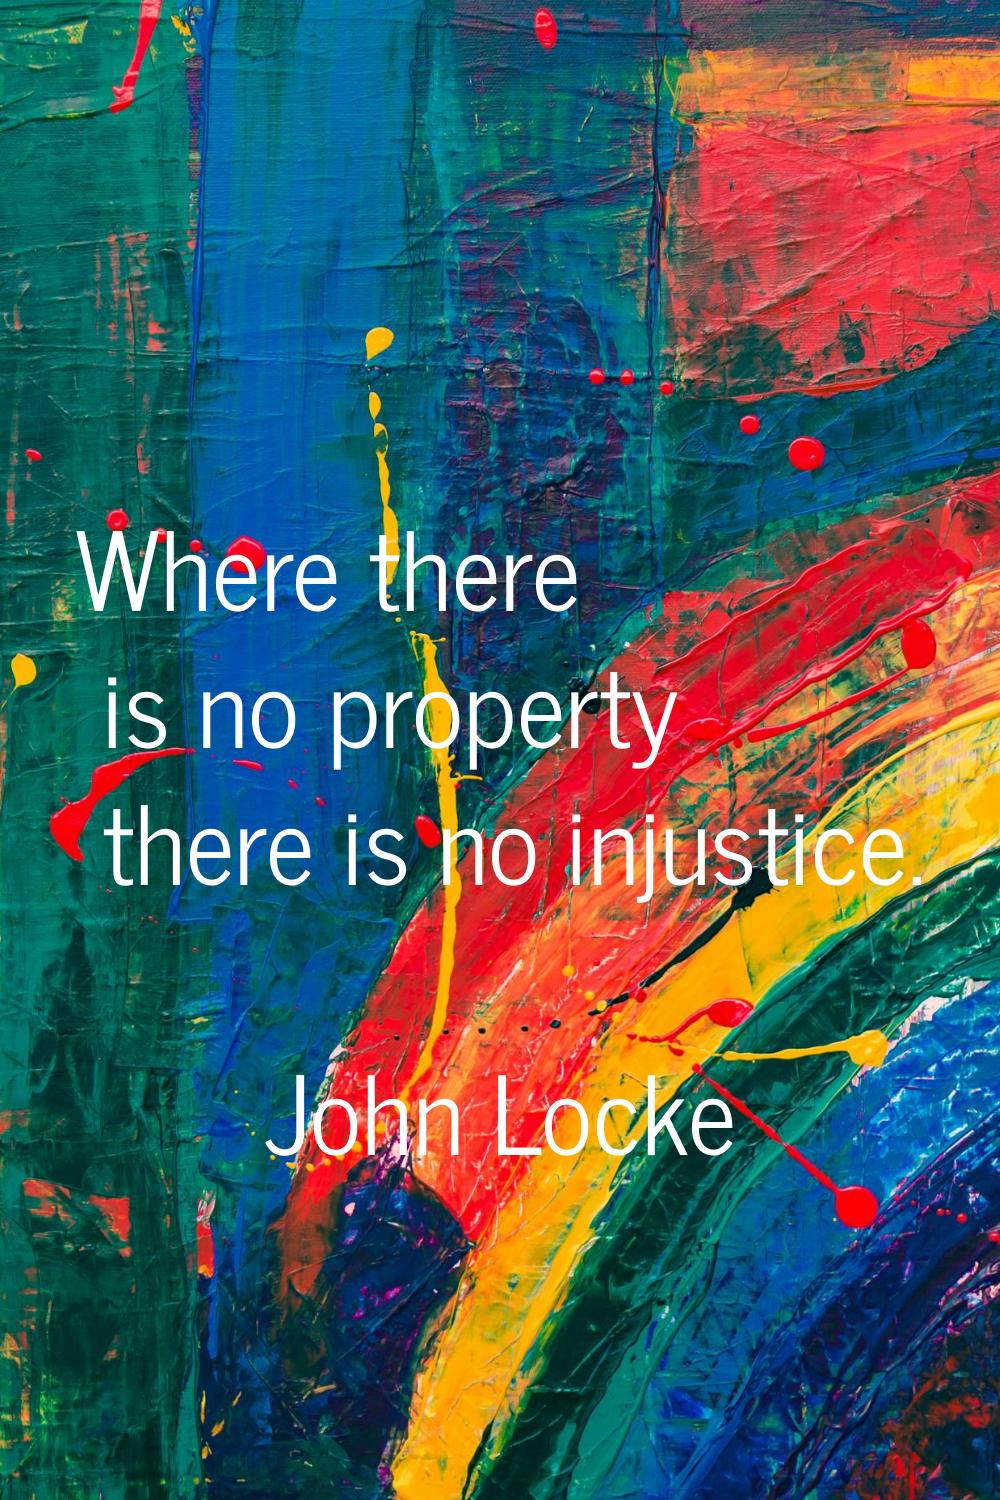 Where there is no property there is no injustice.